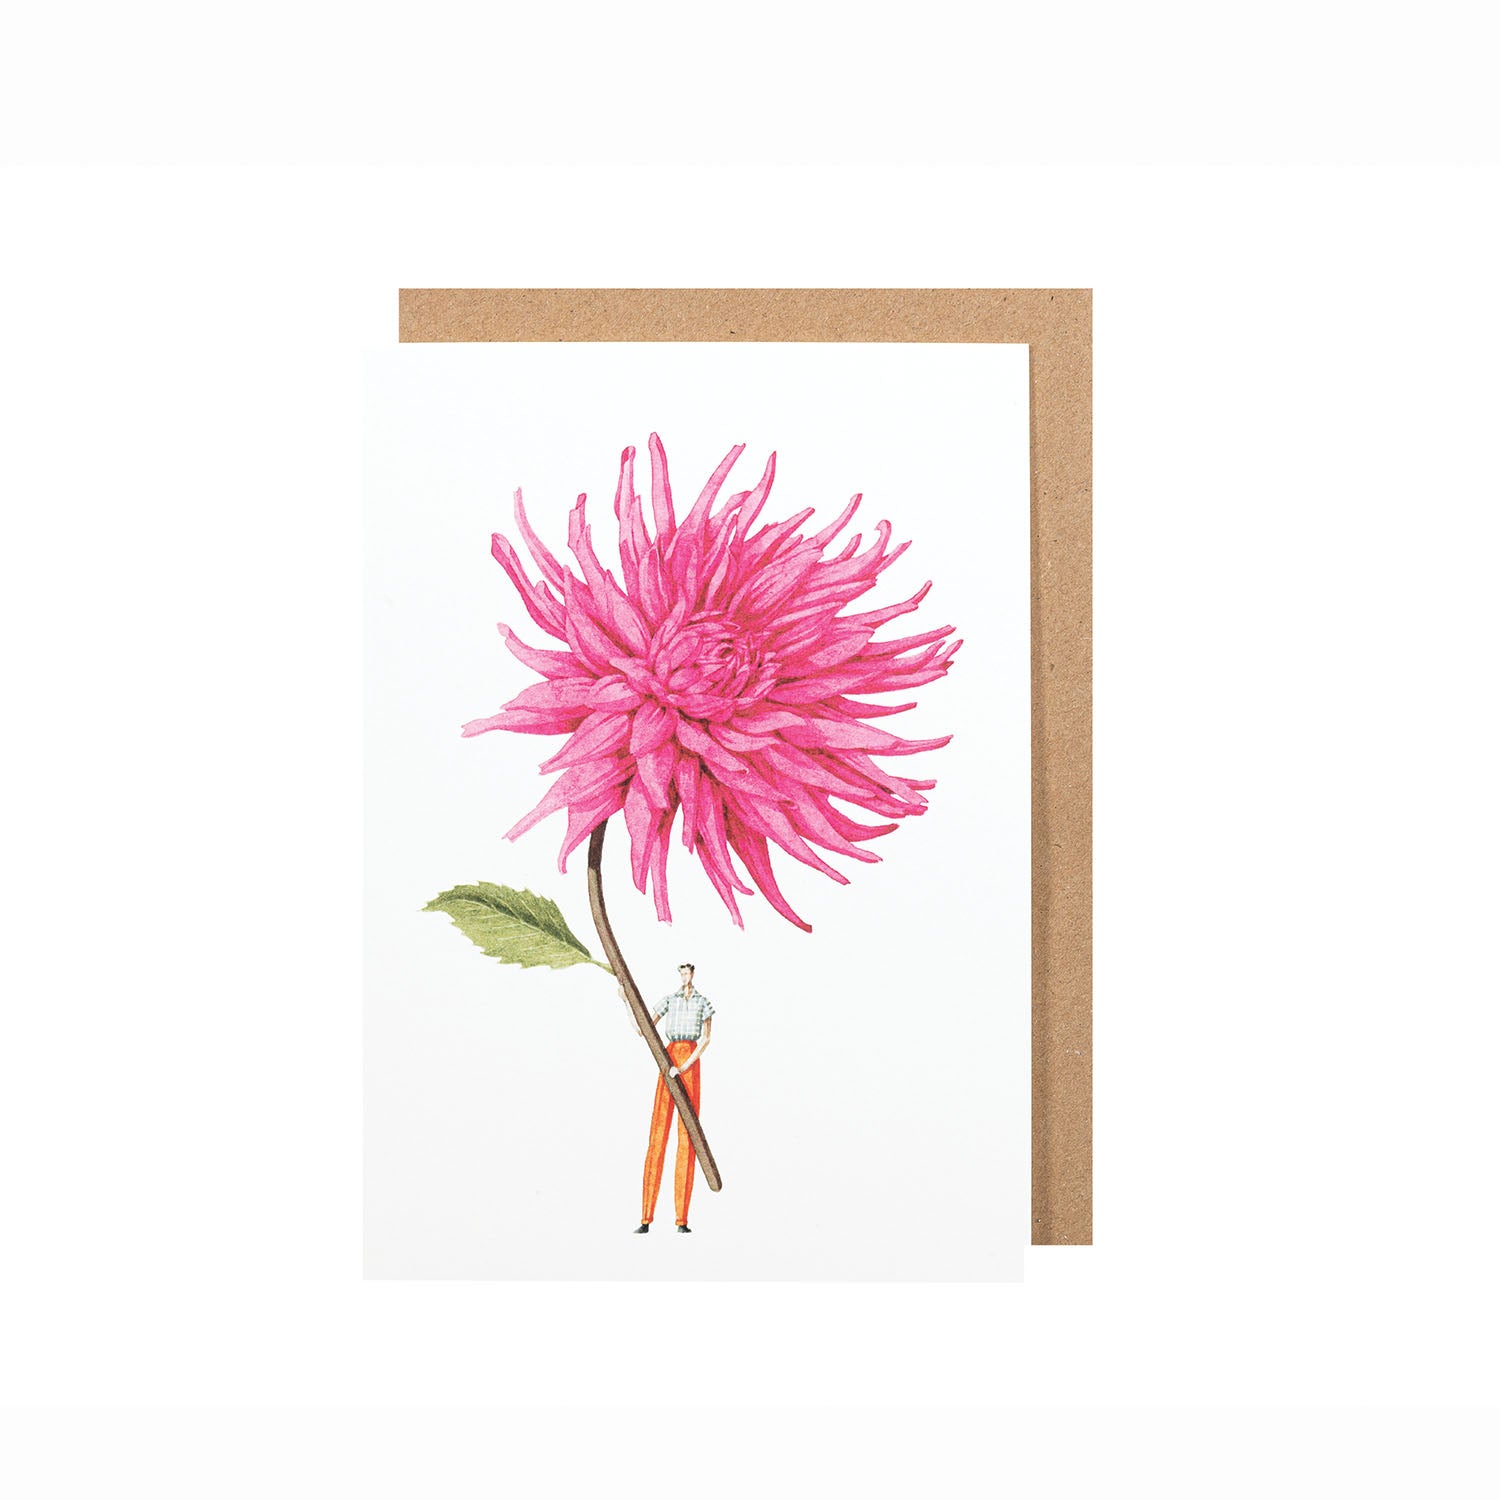 An environmentally sustainable Pink Dahlia Greeting Card featuring a beautiful pink dahlia flower artwork by Hester &amp; Cook.